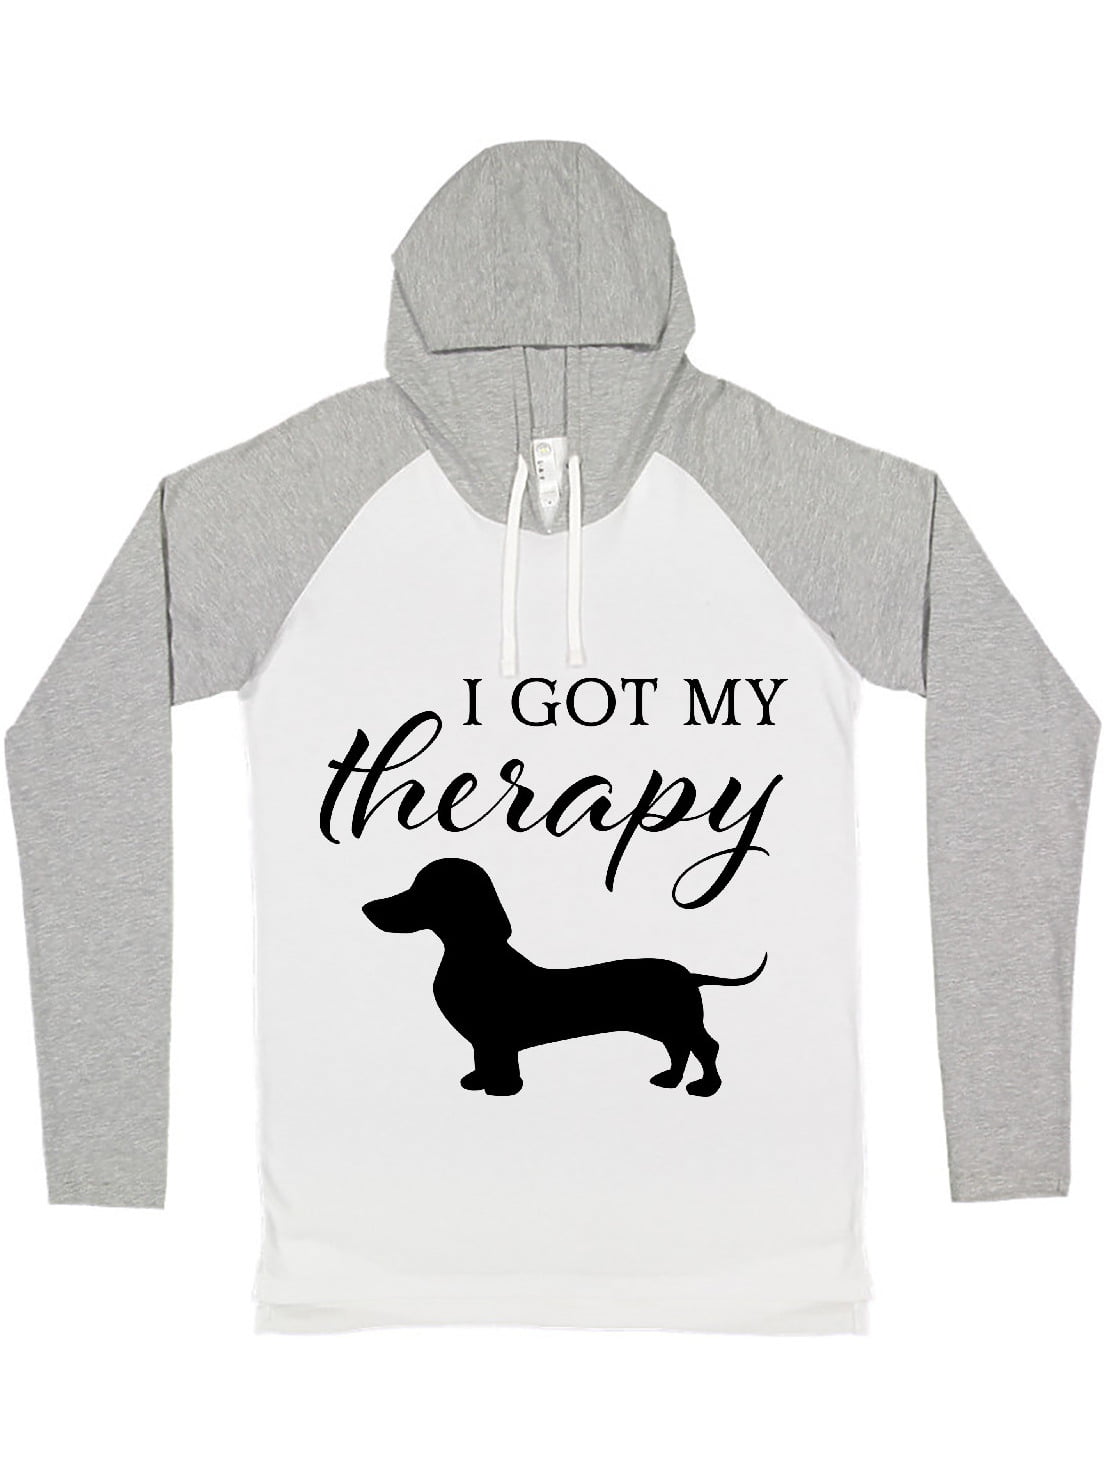 I am Loved by a Dachshund ------ Dog Sweatshirt Also Dog T Shirt Available 